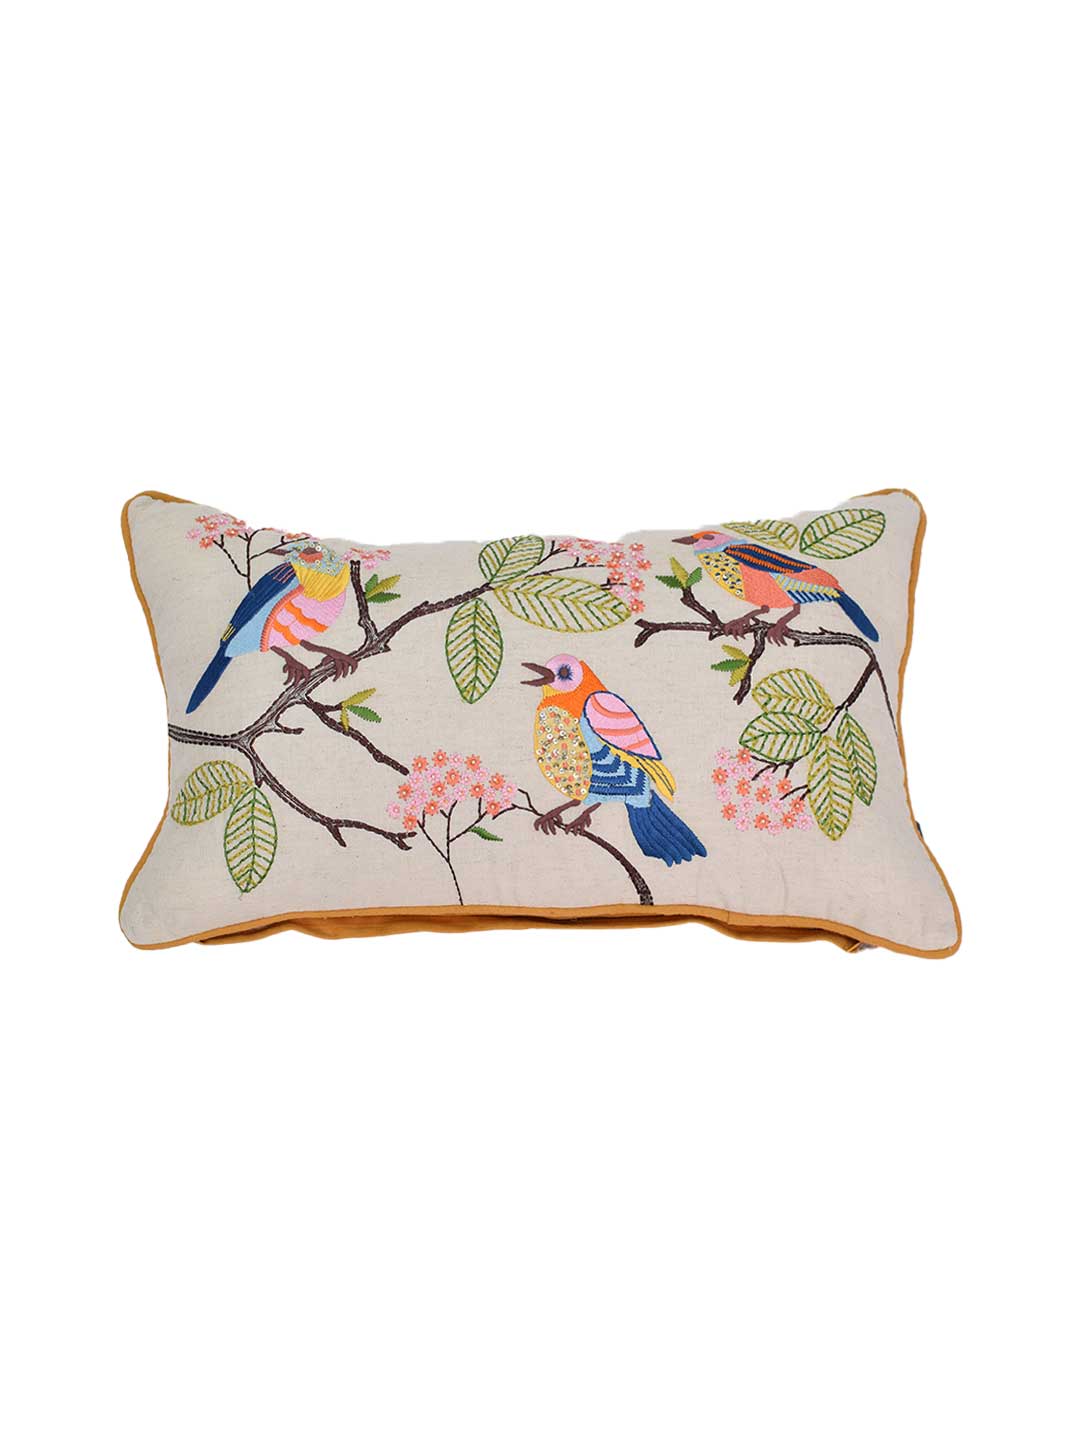 Sweety in the garden Cushion Cover with Filler 30x50cm